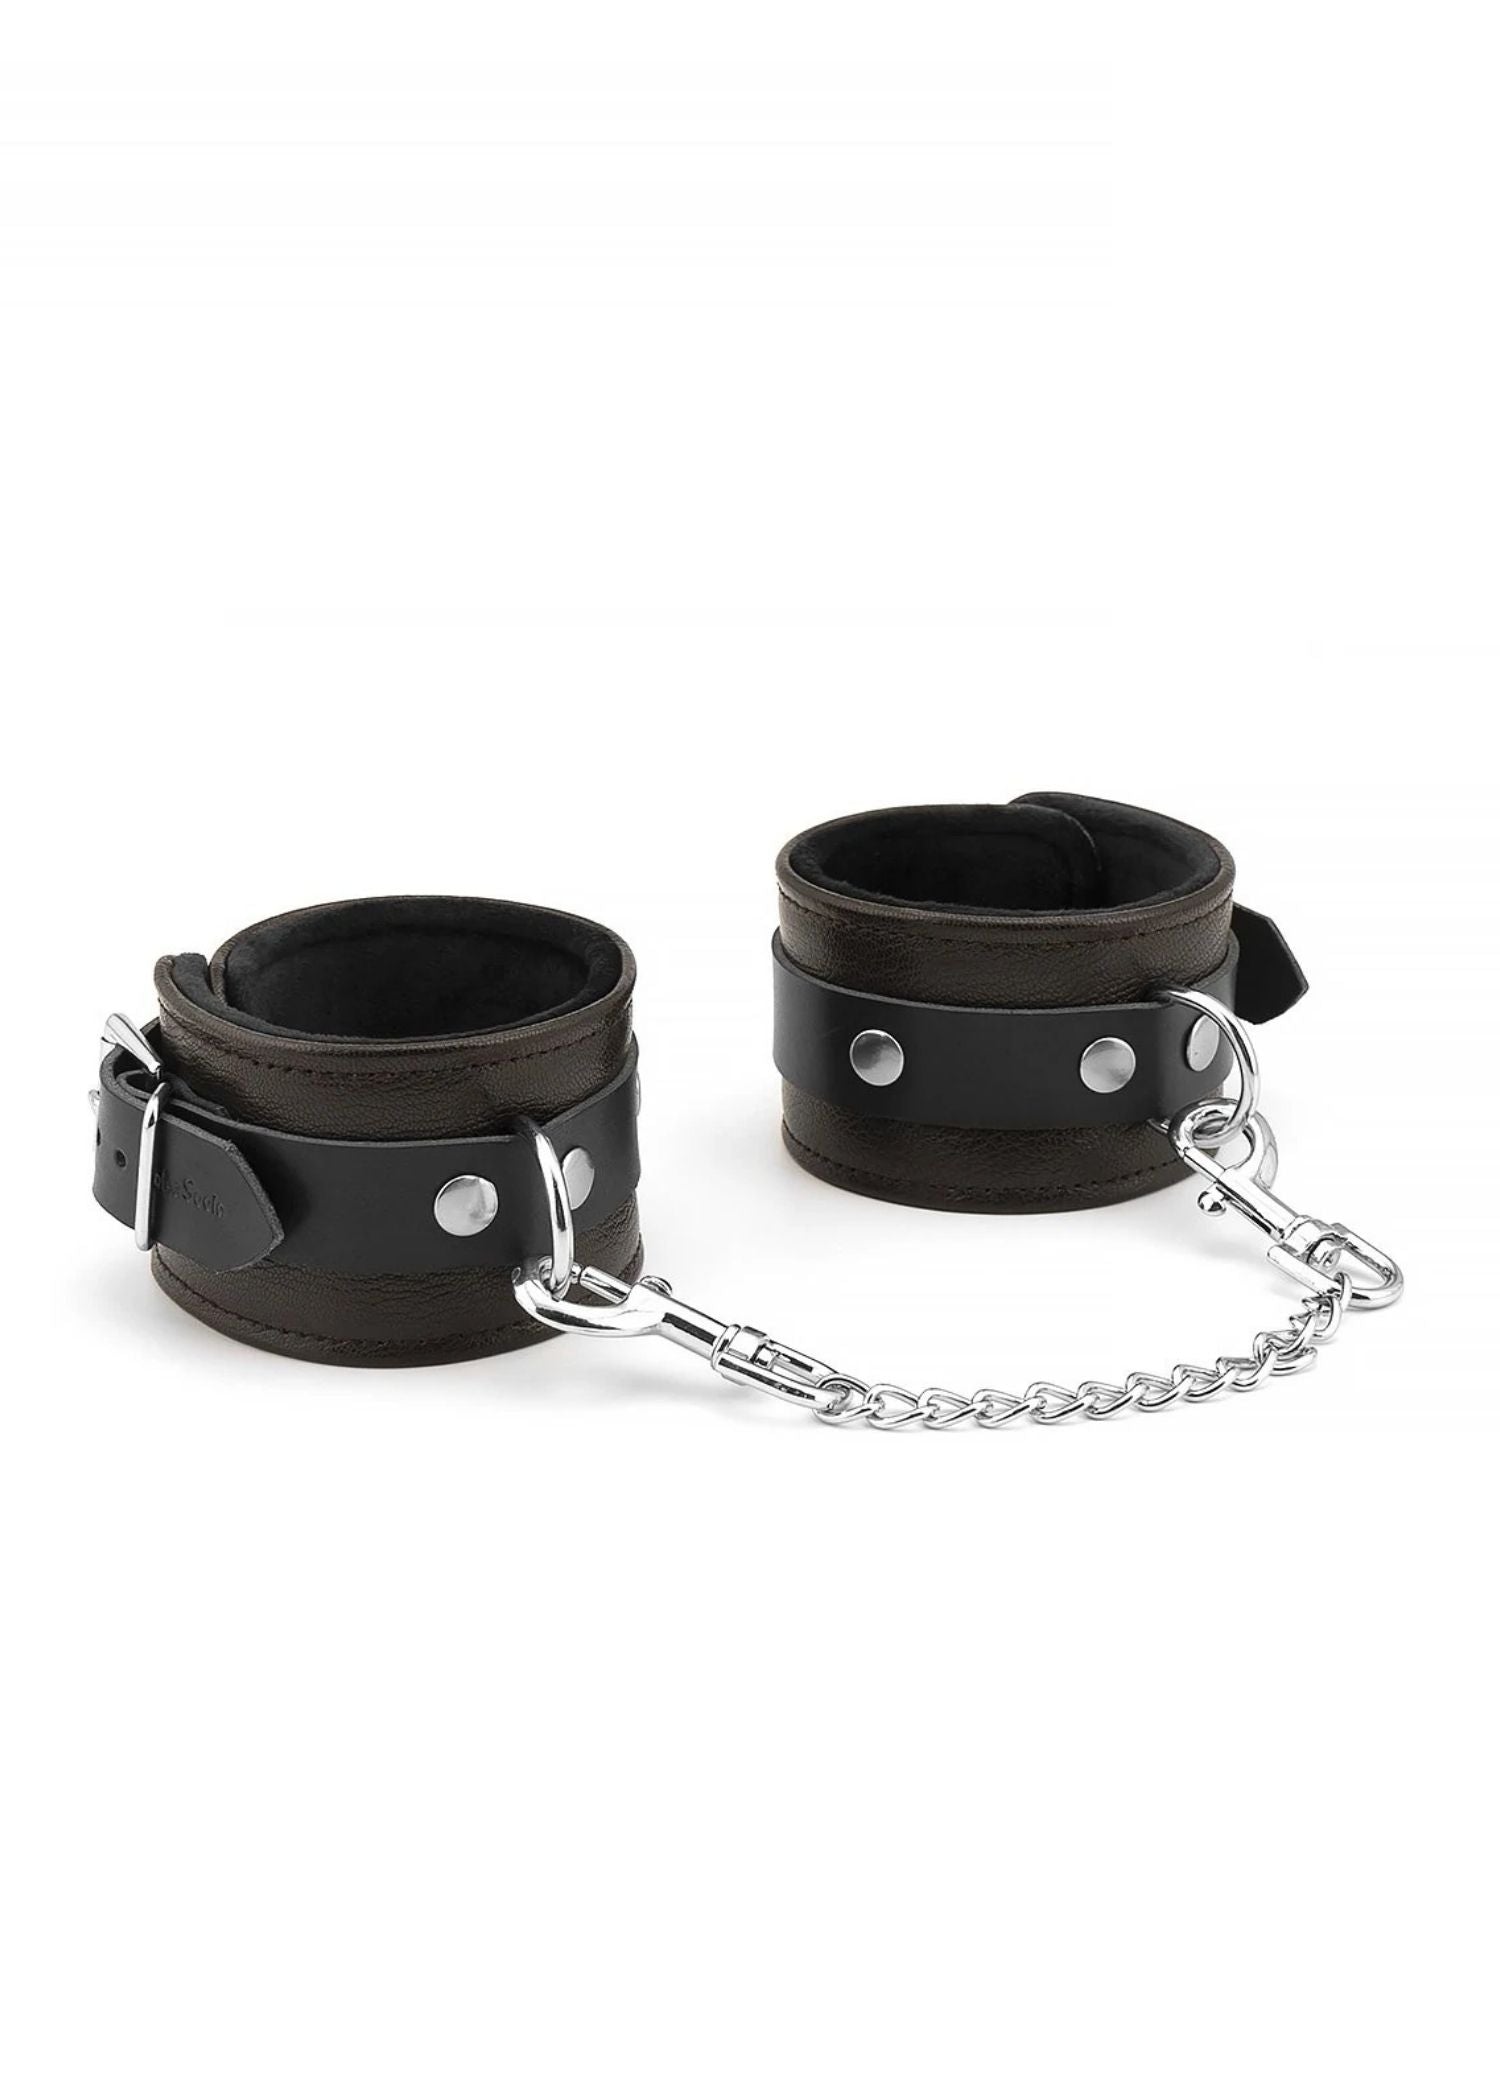 Liebe Seele Wild Gent Brown Ankle Cuffs | Avec Amour